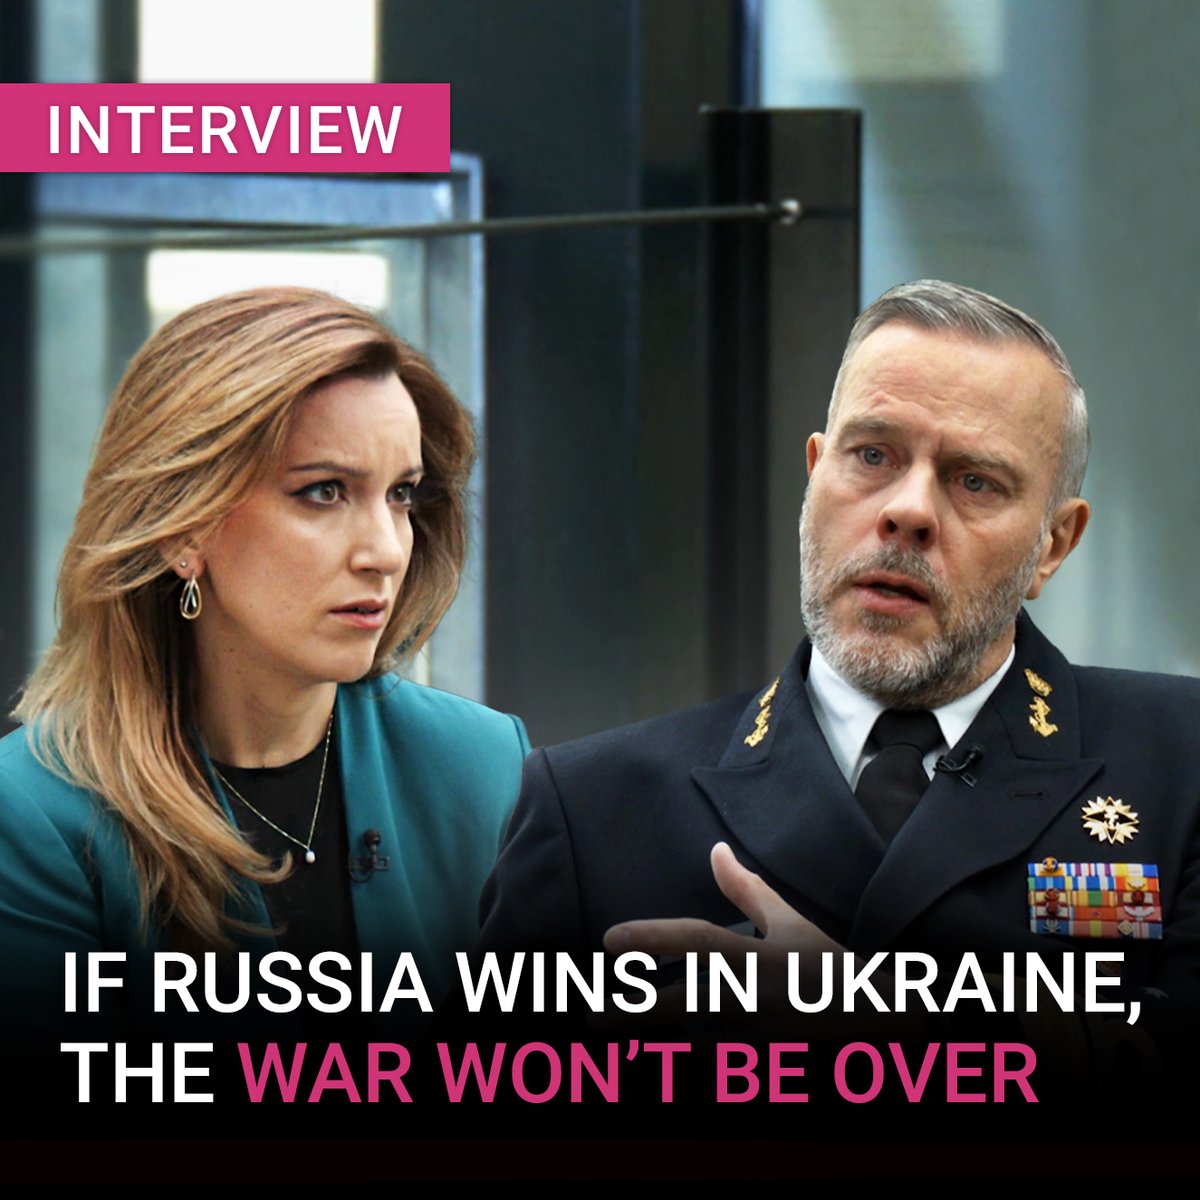 'In 2023 we were too optimistic, in 2024 we have to not be too pessimistic' says NATO Admiral Rob Bauer about the perspectives of the Ukrainian military. Watch the in-depth interview here: youtu.be/nB6I8_1HX0k